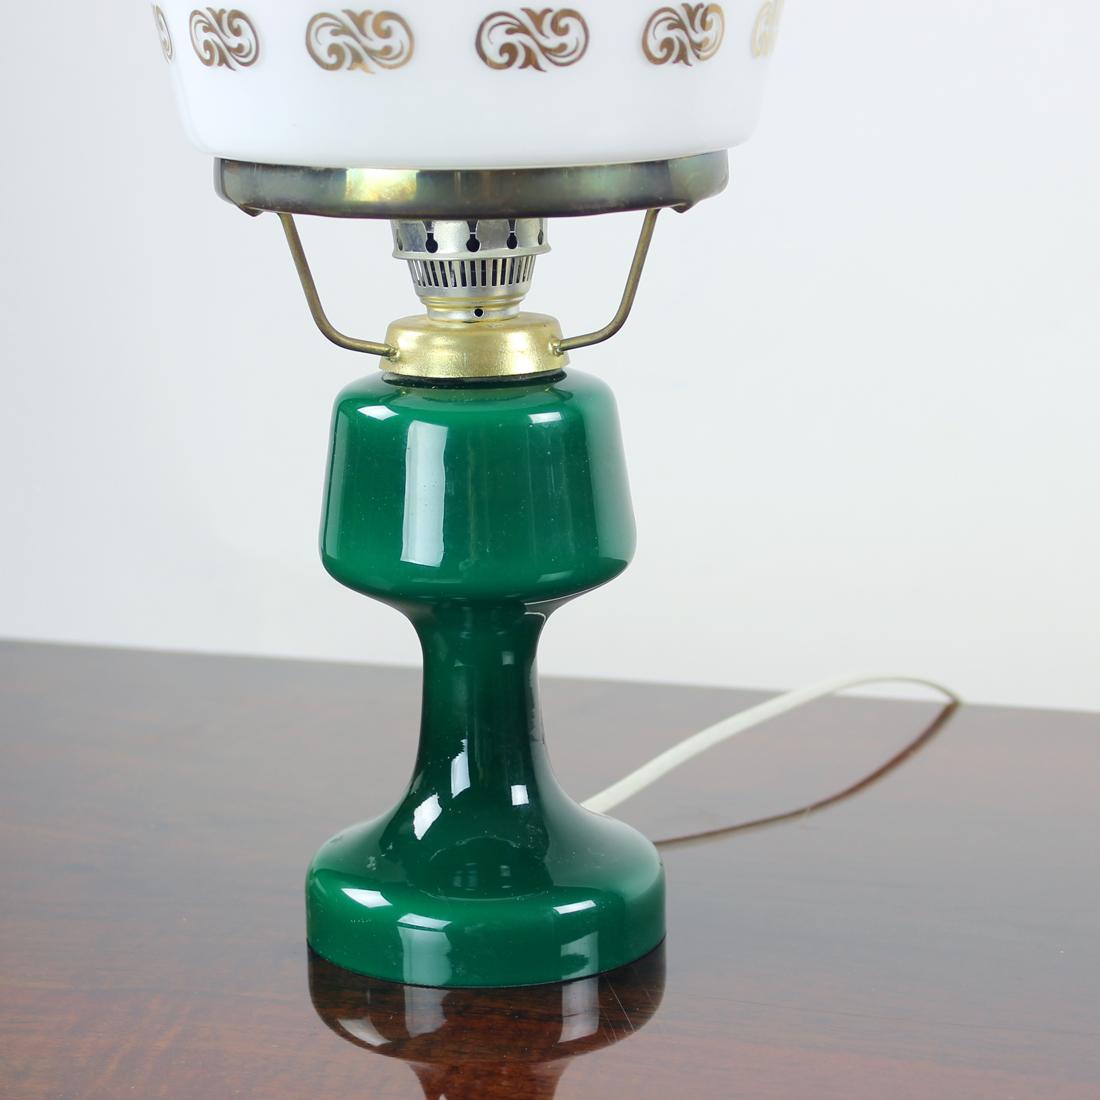 Beautiful vintage table lamp. Produced by OPP Jihlava (Original label visible) in 1950s. The lamp has a green ceramic base which holds two glass shields. One in clear transparent glass and another one is in white opaline glass with gold ornaments.